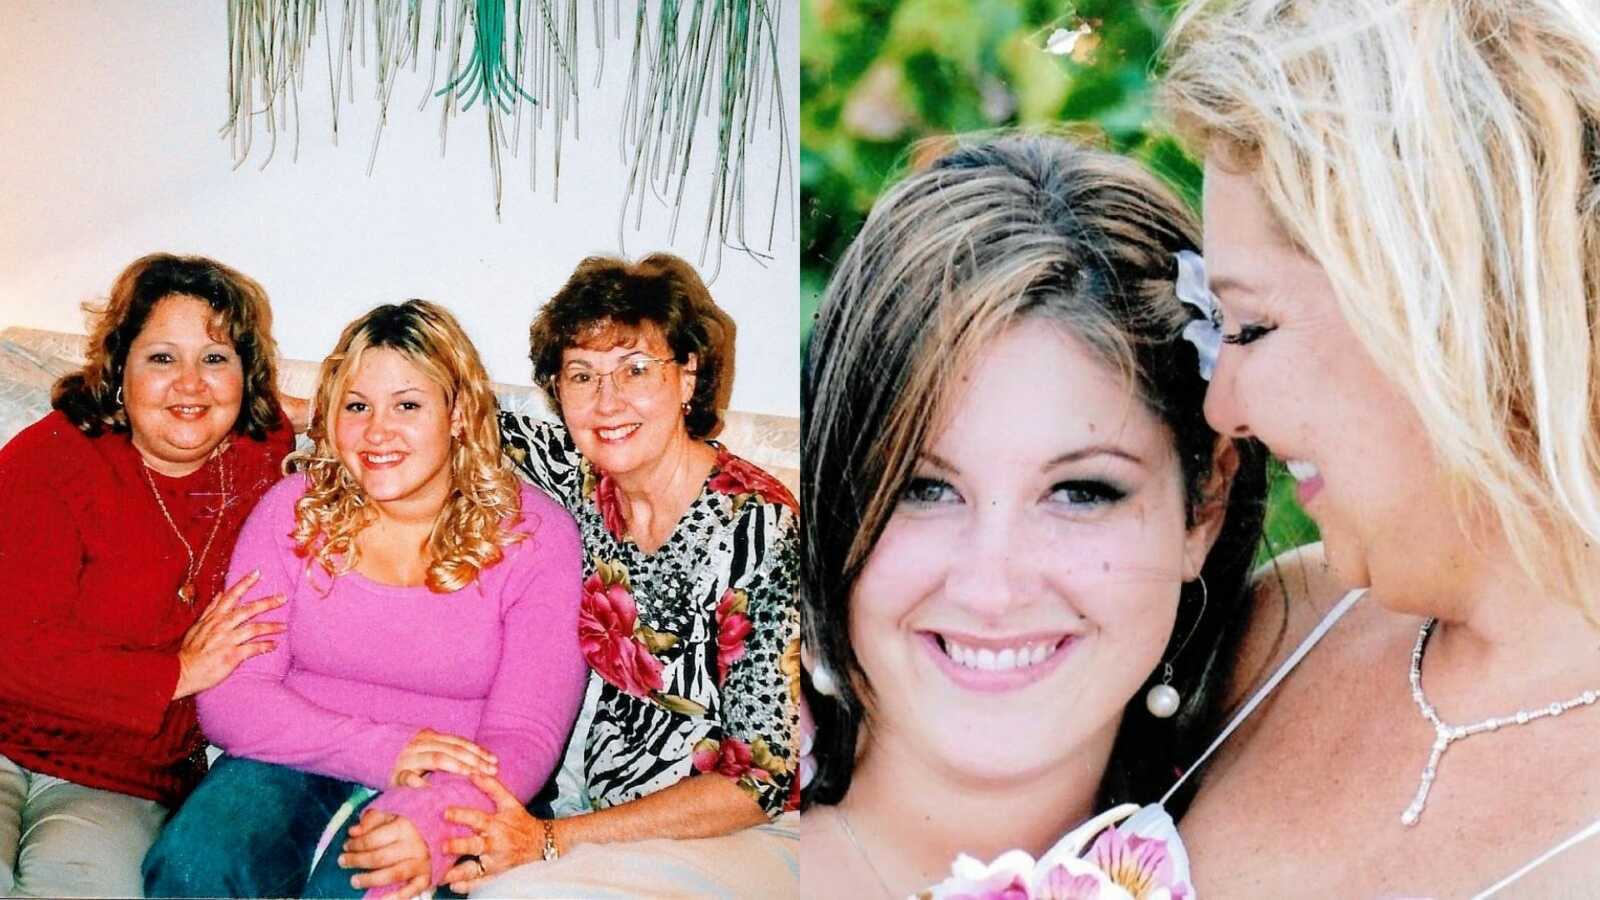 Adoptee shares photos with her birth mom and adopted mom